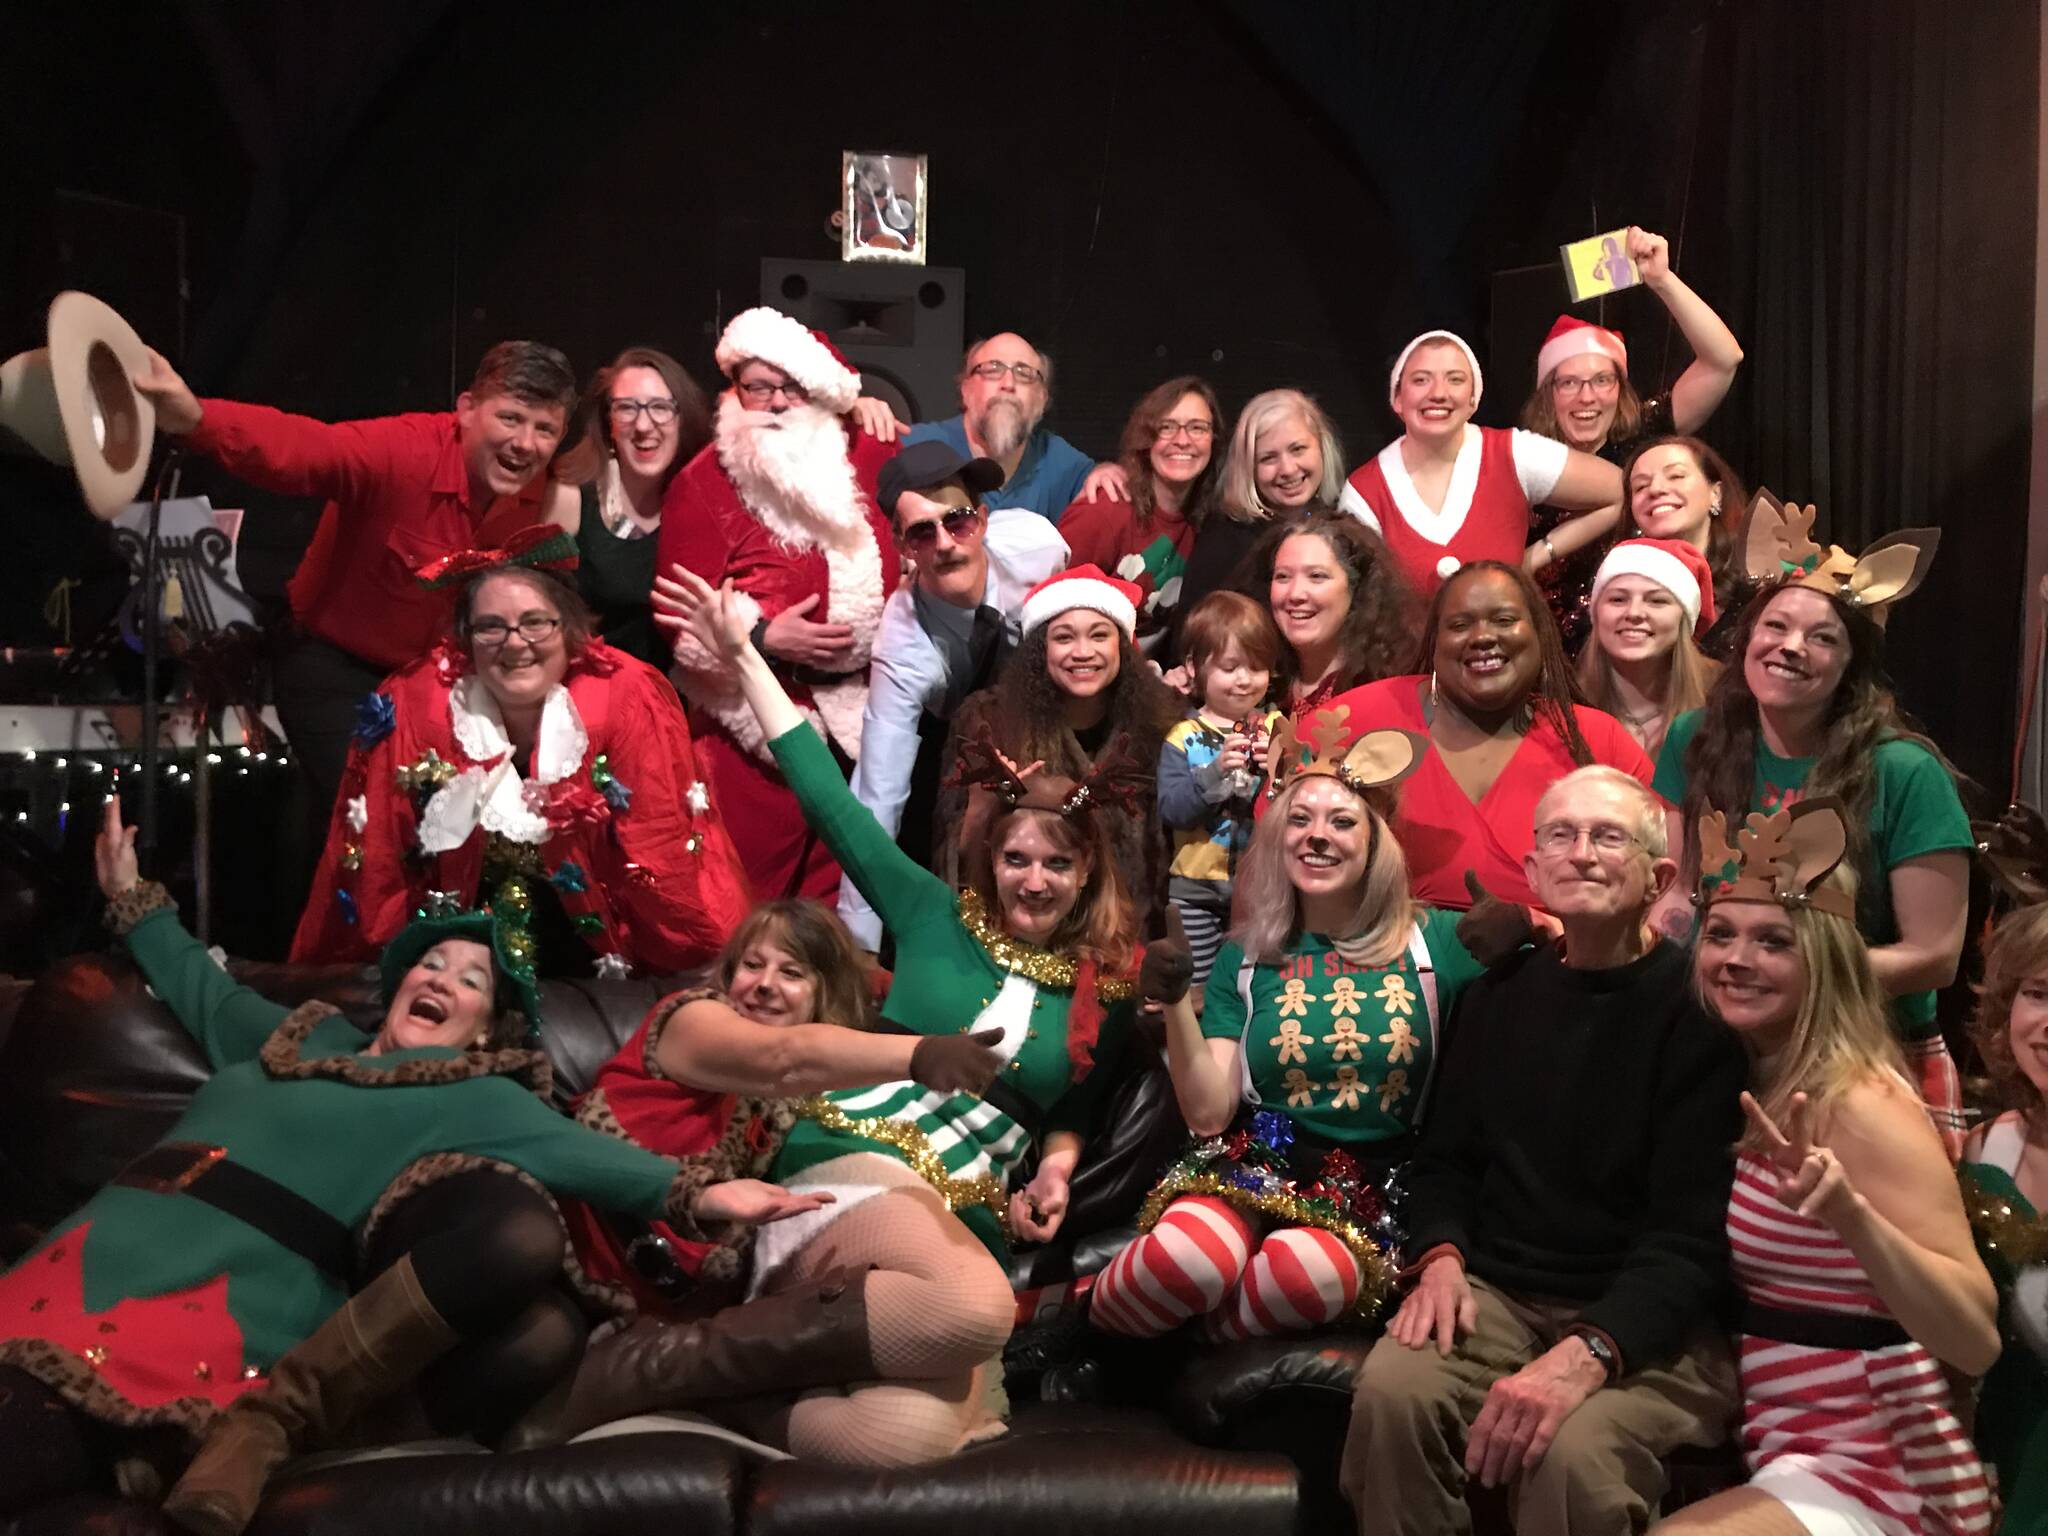 Performers in the Gold Town Theater’s virtual 2020 Christmas Extravaganza pose together for a group shot. This year’s event will involve performers traveling from location to location performing smaller sets. (Courtesy photo / Collette Costa)